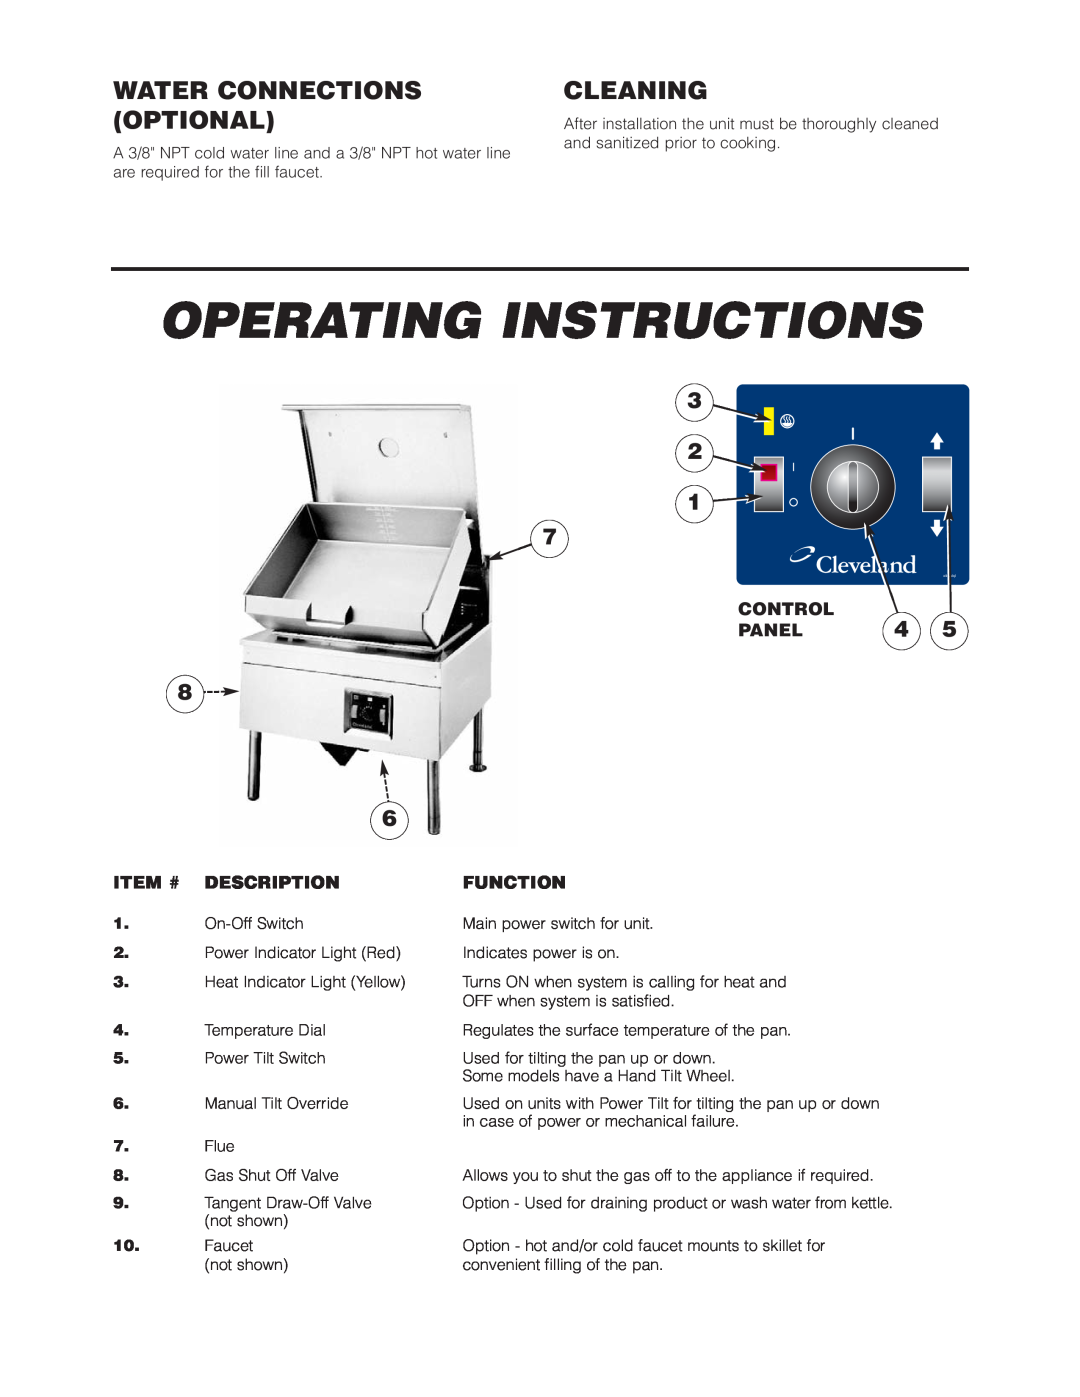 Cleveland Range SGM-30-TR Operating Instructions, Water Connections Optional, Cleaning, Control Panel, Item # Description 